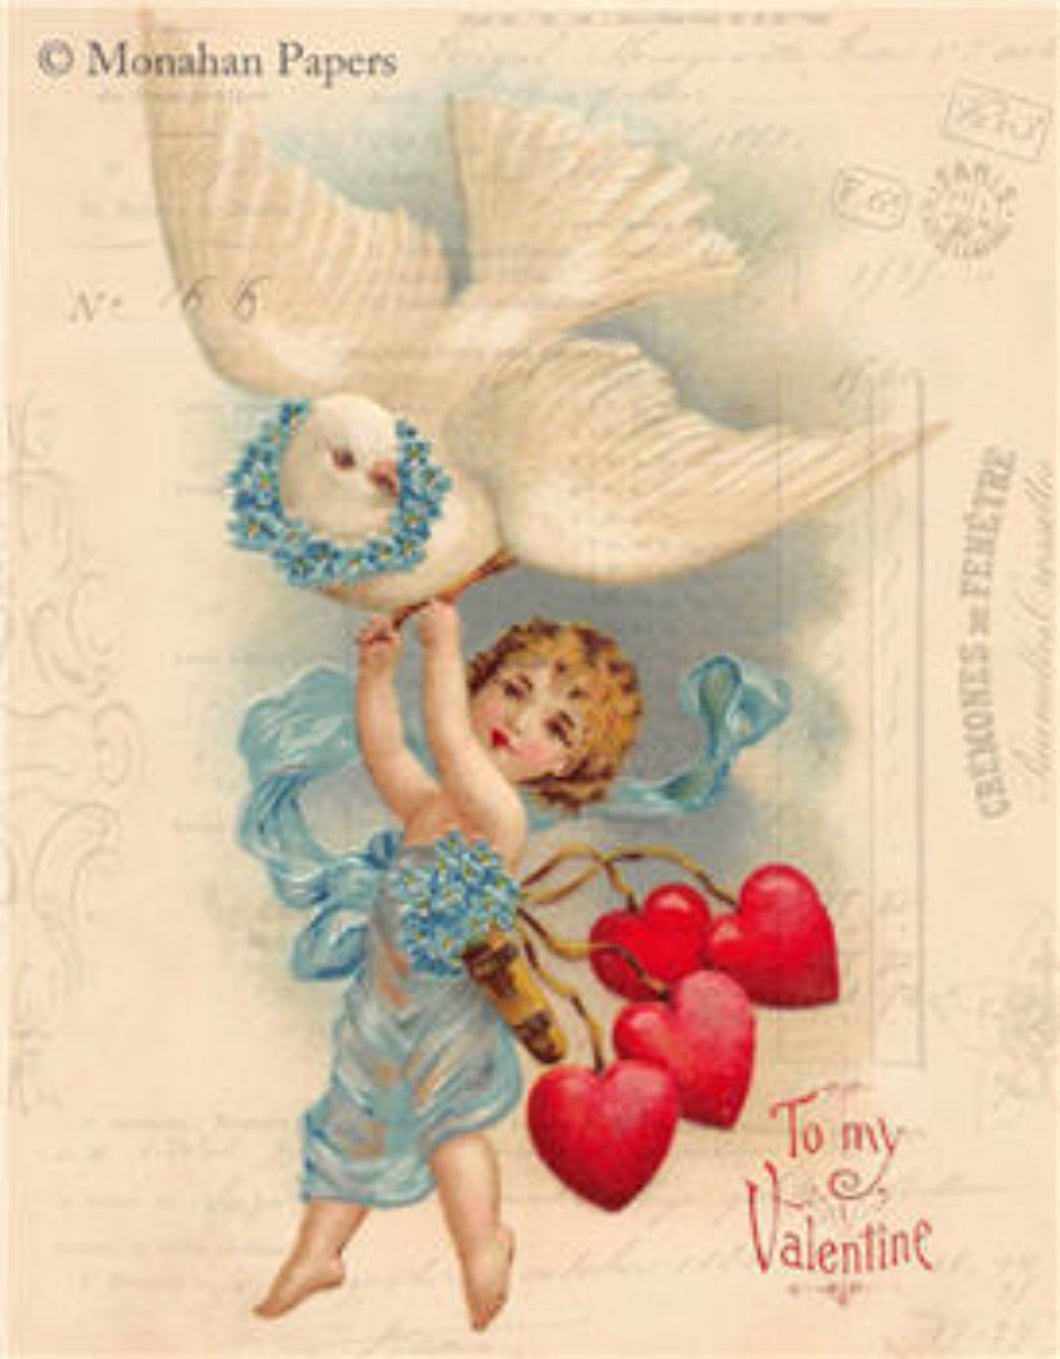 To My Valentine by Monahan Papers, V95